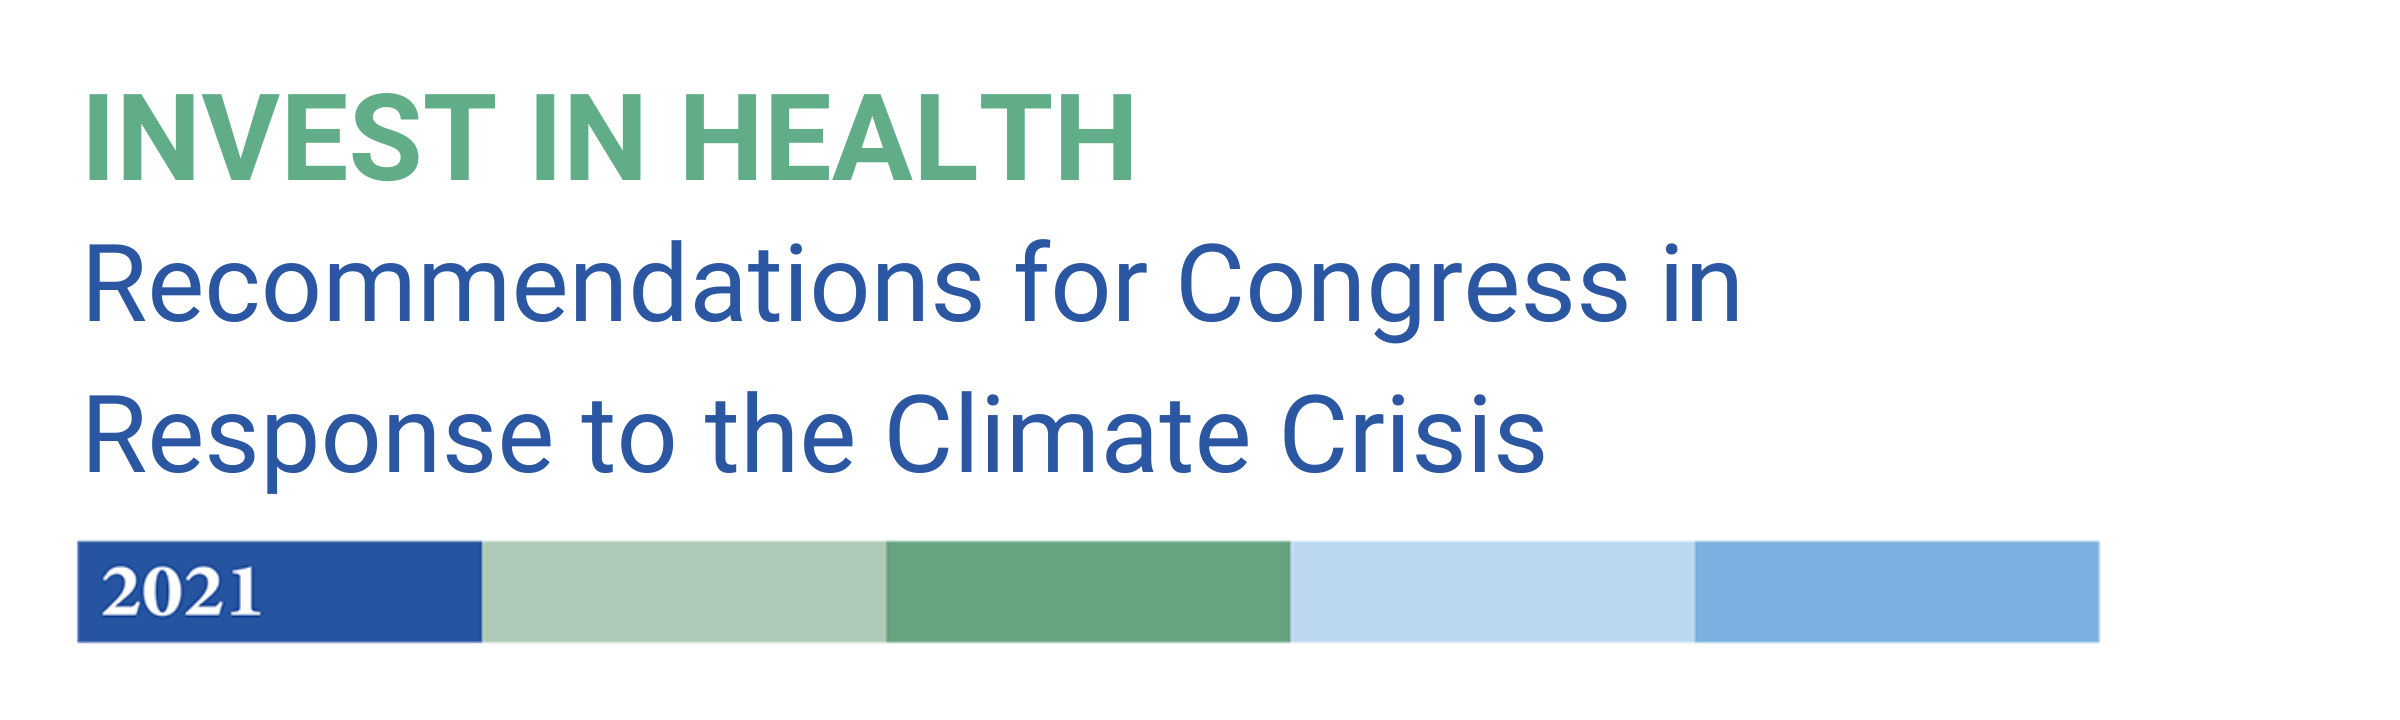 America’s Health Organizations Call on Congress to Invest in  Protecting and Promoting Health in Response to the Climate Crisis